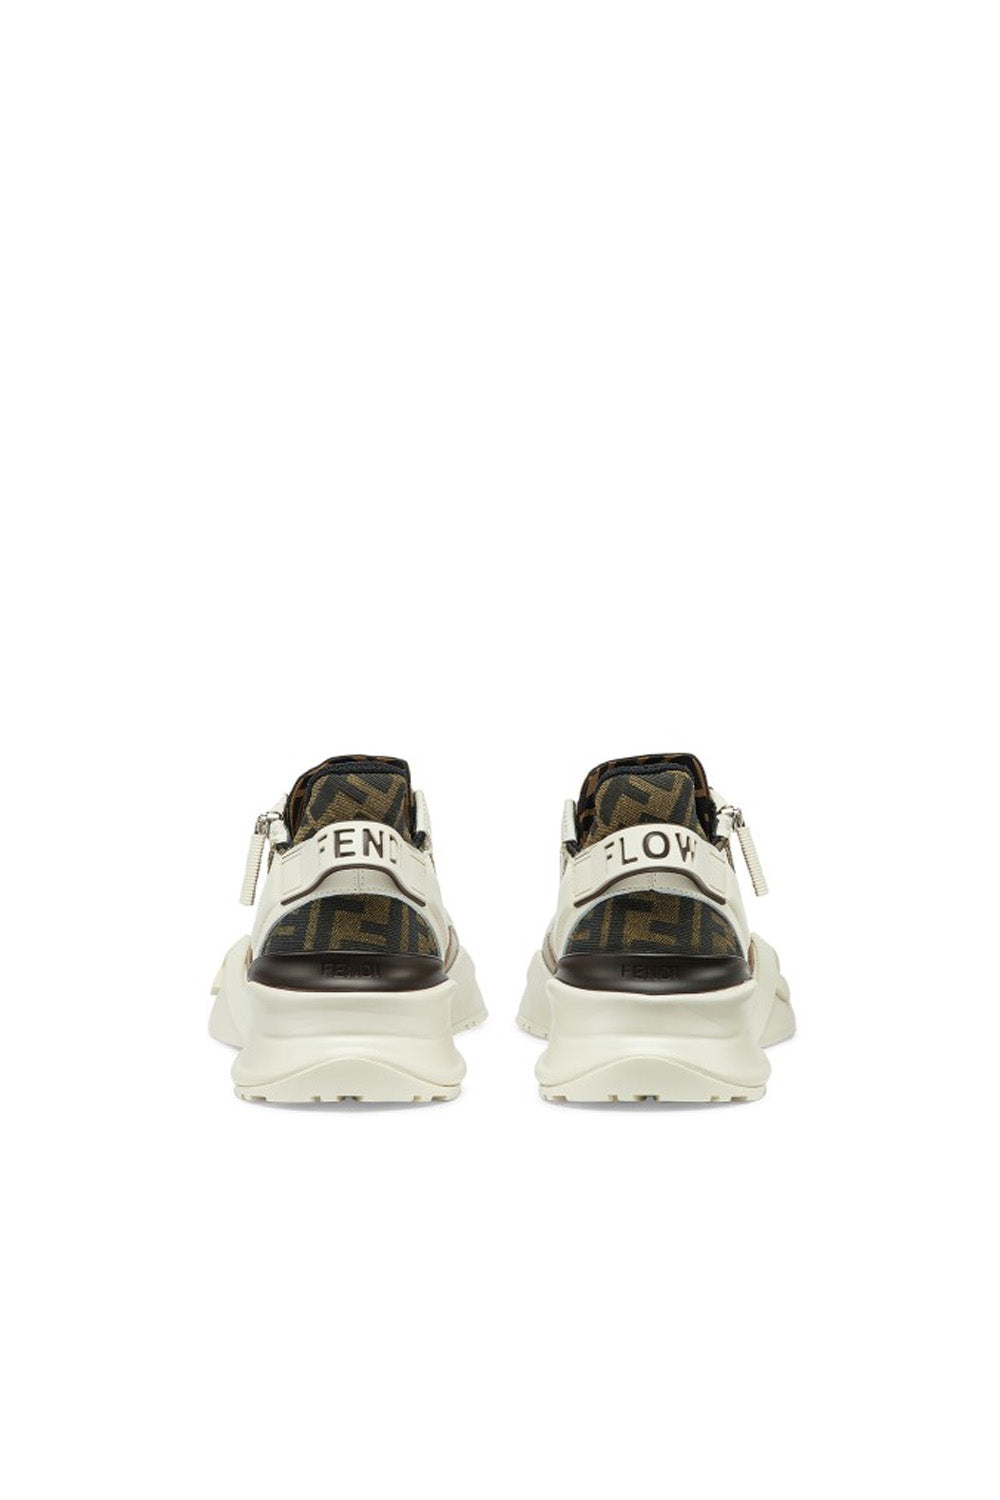 Fendi Flow leather and jacquard fabric sneakers